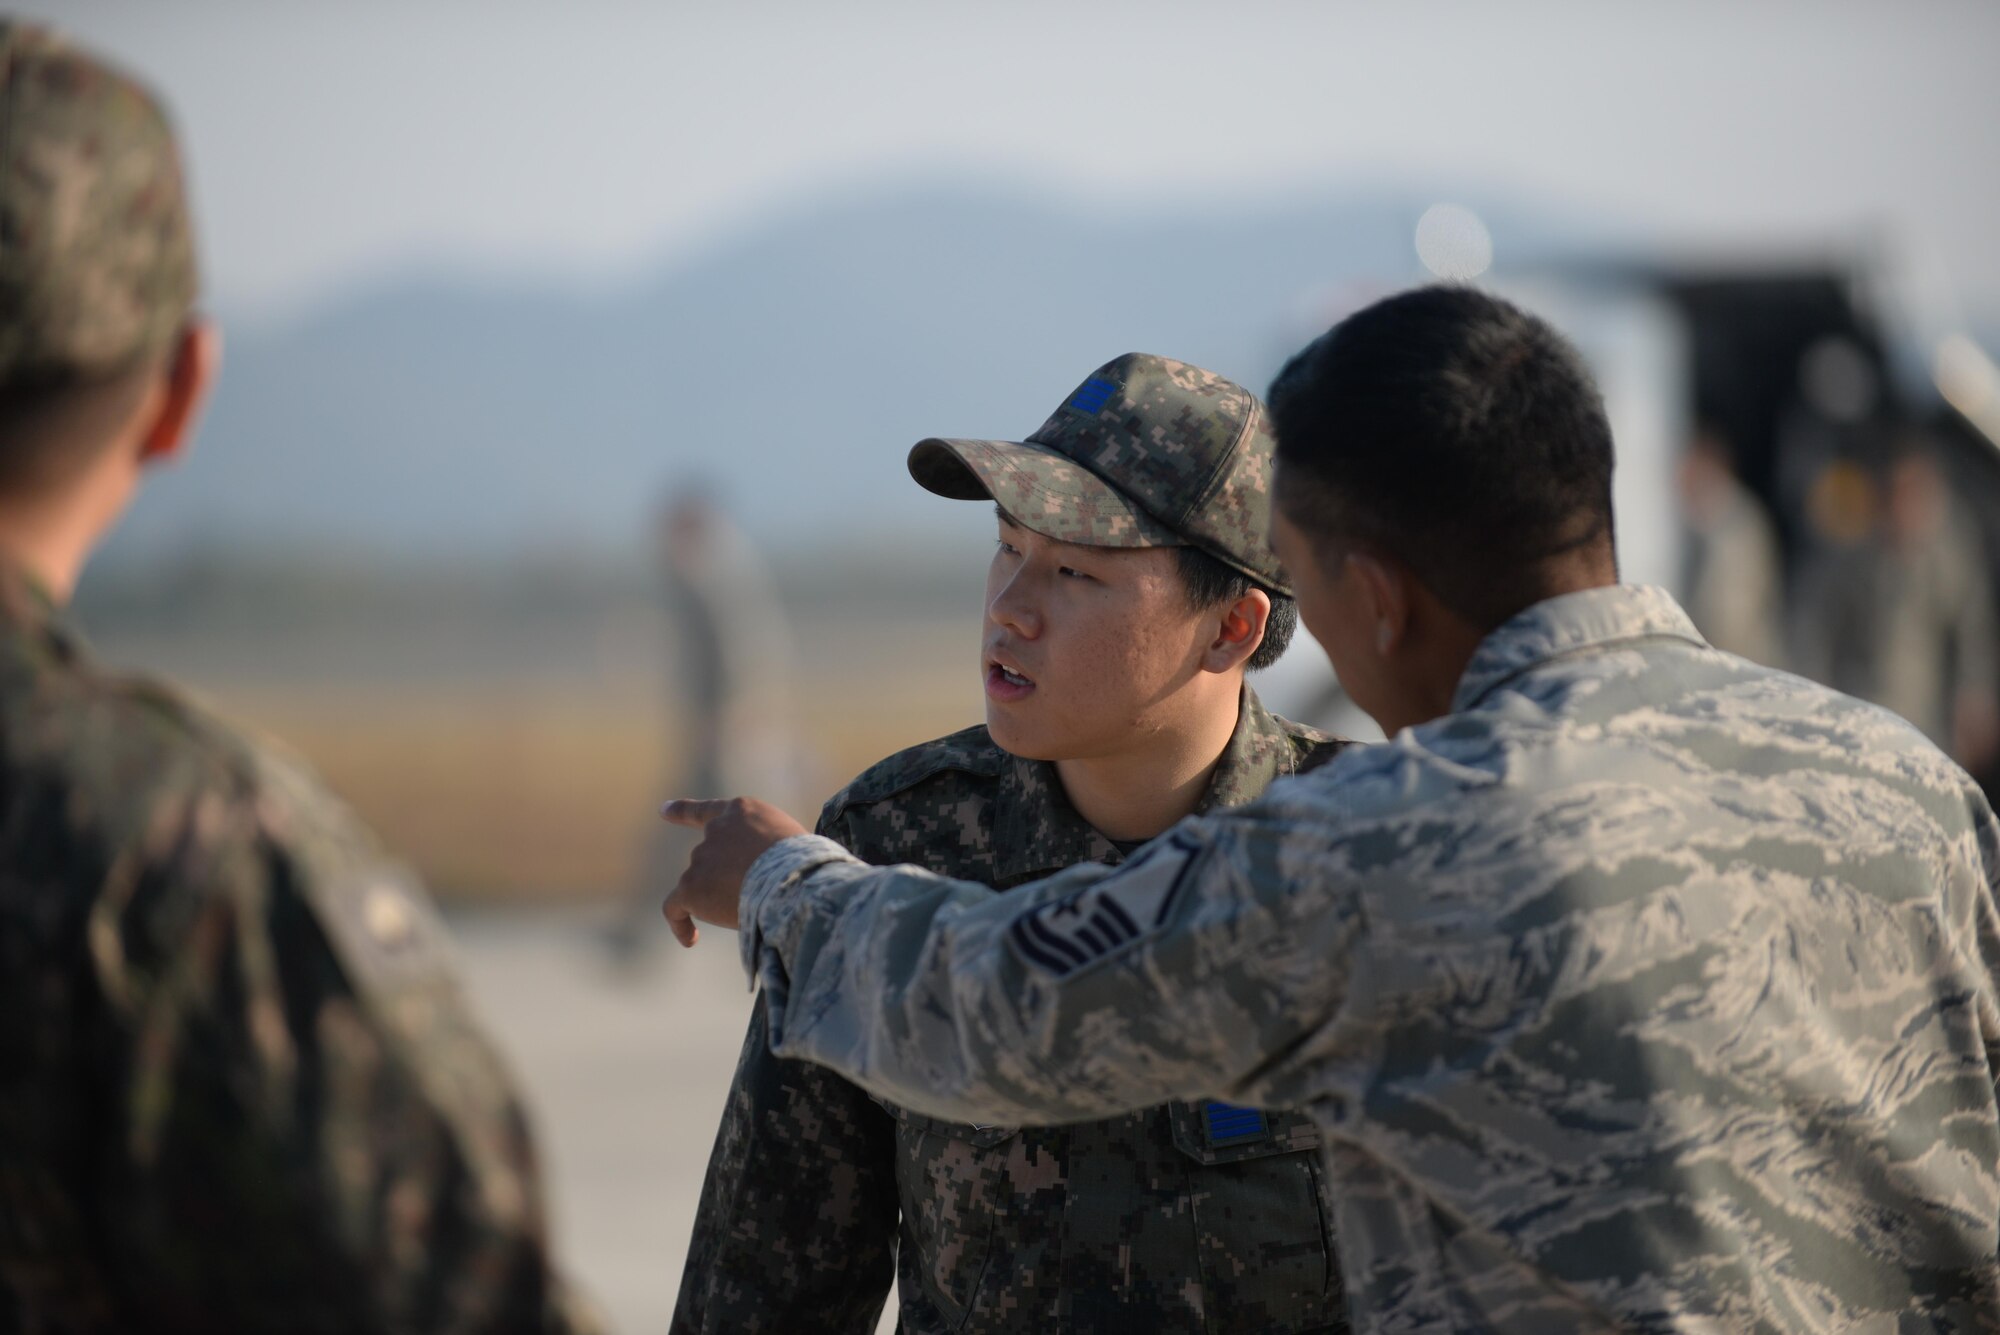 U.S. Air Force Master Sgt. Richard Loreto, Air Force Civil Engineer Center contingency instructor, explains a runway repair process to Republic of Korea Airmen during a bilateral training exercise at Gwangju Air Base, R.O.K., Nov. 6, 2017. Approximately forty U.S. Airmen from the 773d Civil Engineer Squadron at Joint Base Elmendorf-Richardson, Alaska, and 40 Republic of Korea Airmen from Gwangju trained together for a week to learn a new runway repair process for wartime contingencies. The bilateral training exercise enhanced interoperability and built partnership capacity in the Indo-Asia Pacific region. (U.S. Air Force photo by Senior Airman Curt Beach)